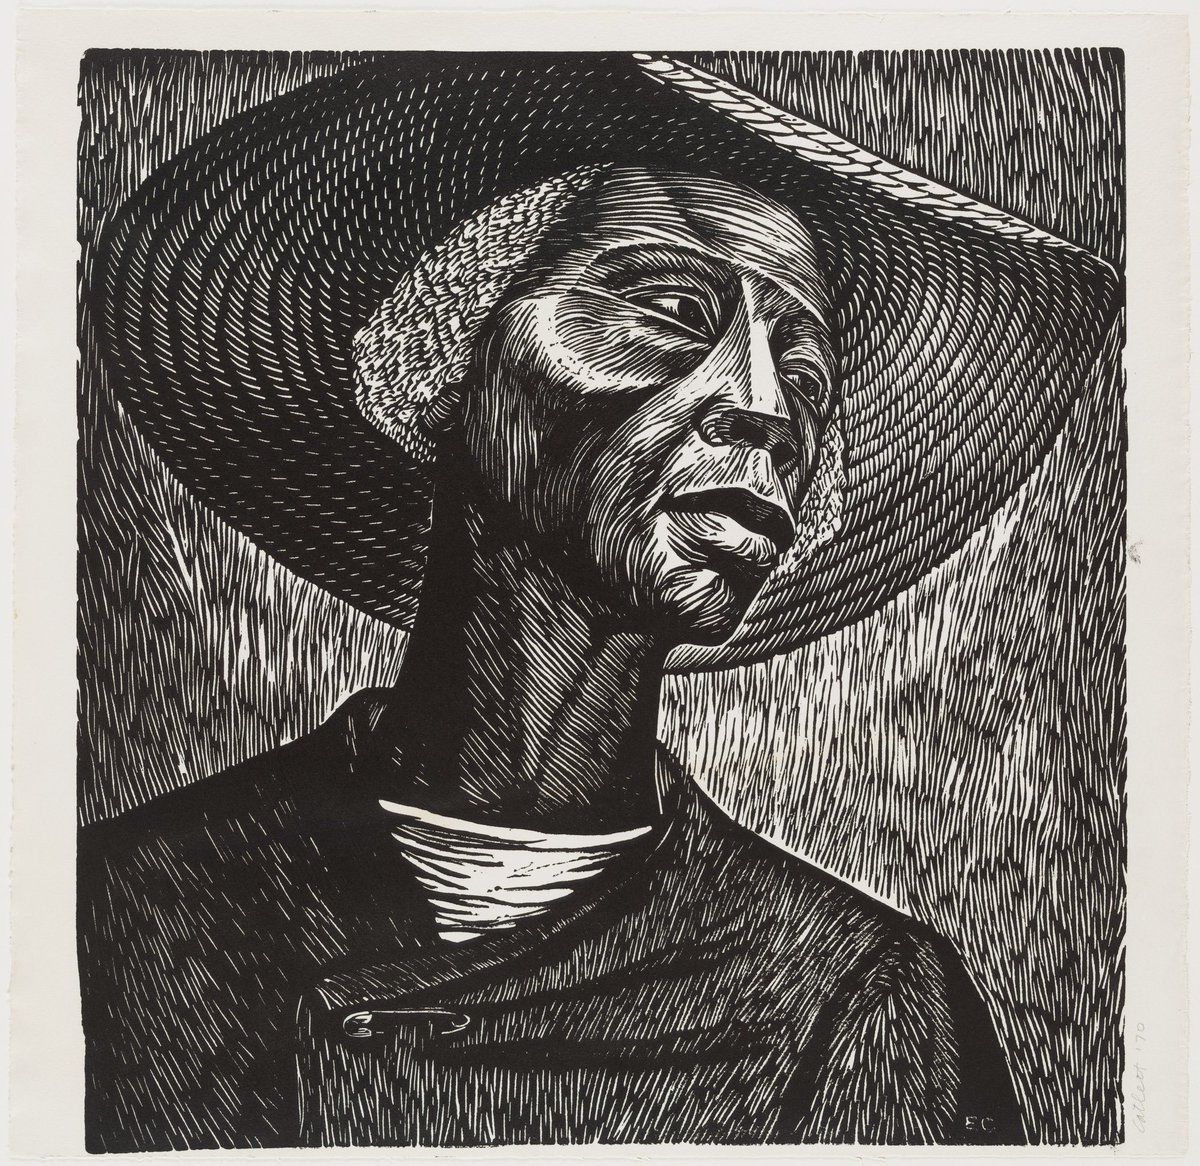 Elizabeth CatlettCatlett highlighted the struggle of black people with her art by depicting sharecroppers and activists. “I have always wanted my art to service my people—to reflect us, to relate to us, to stimulate us, to make us aware of our potential”